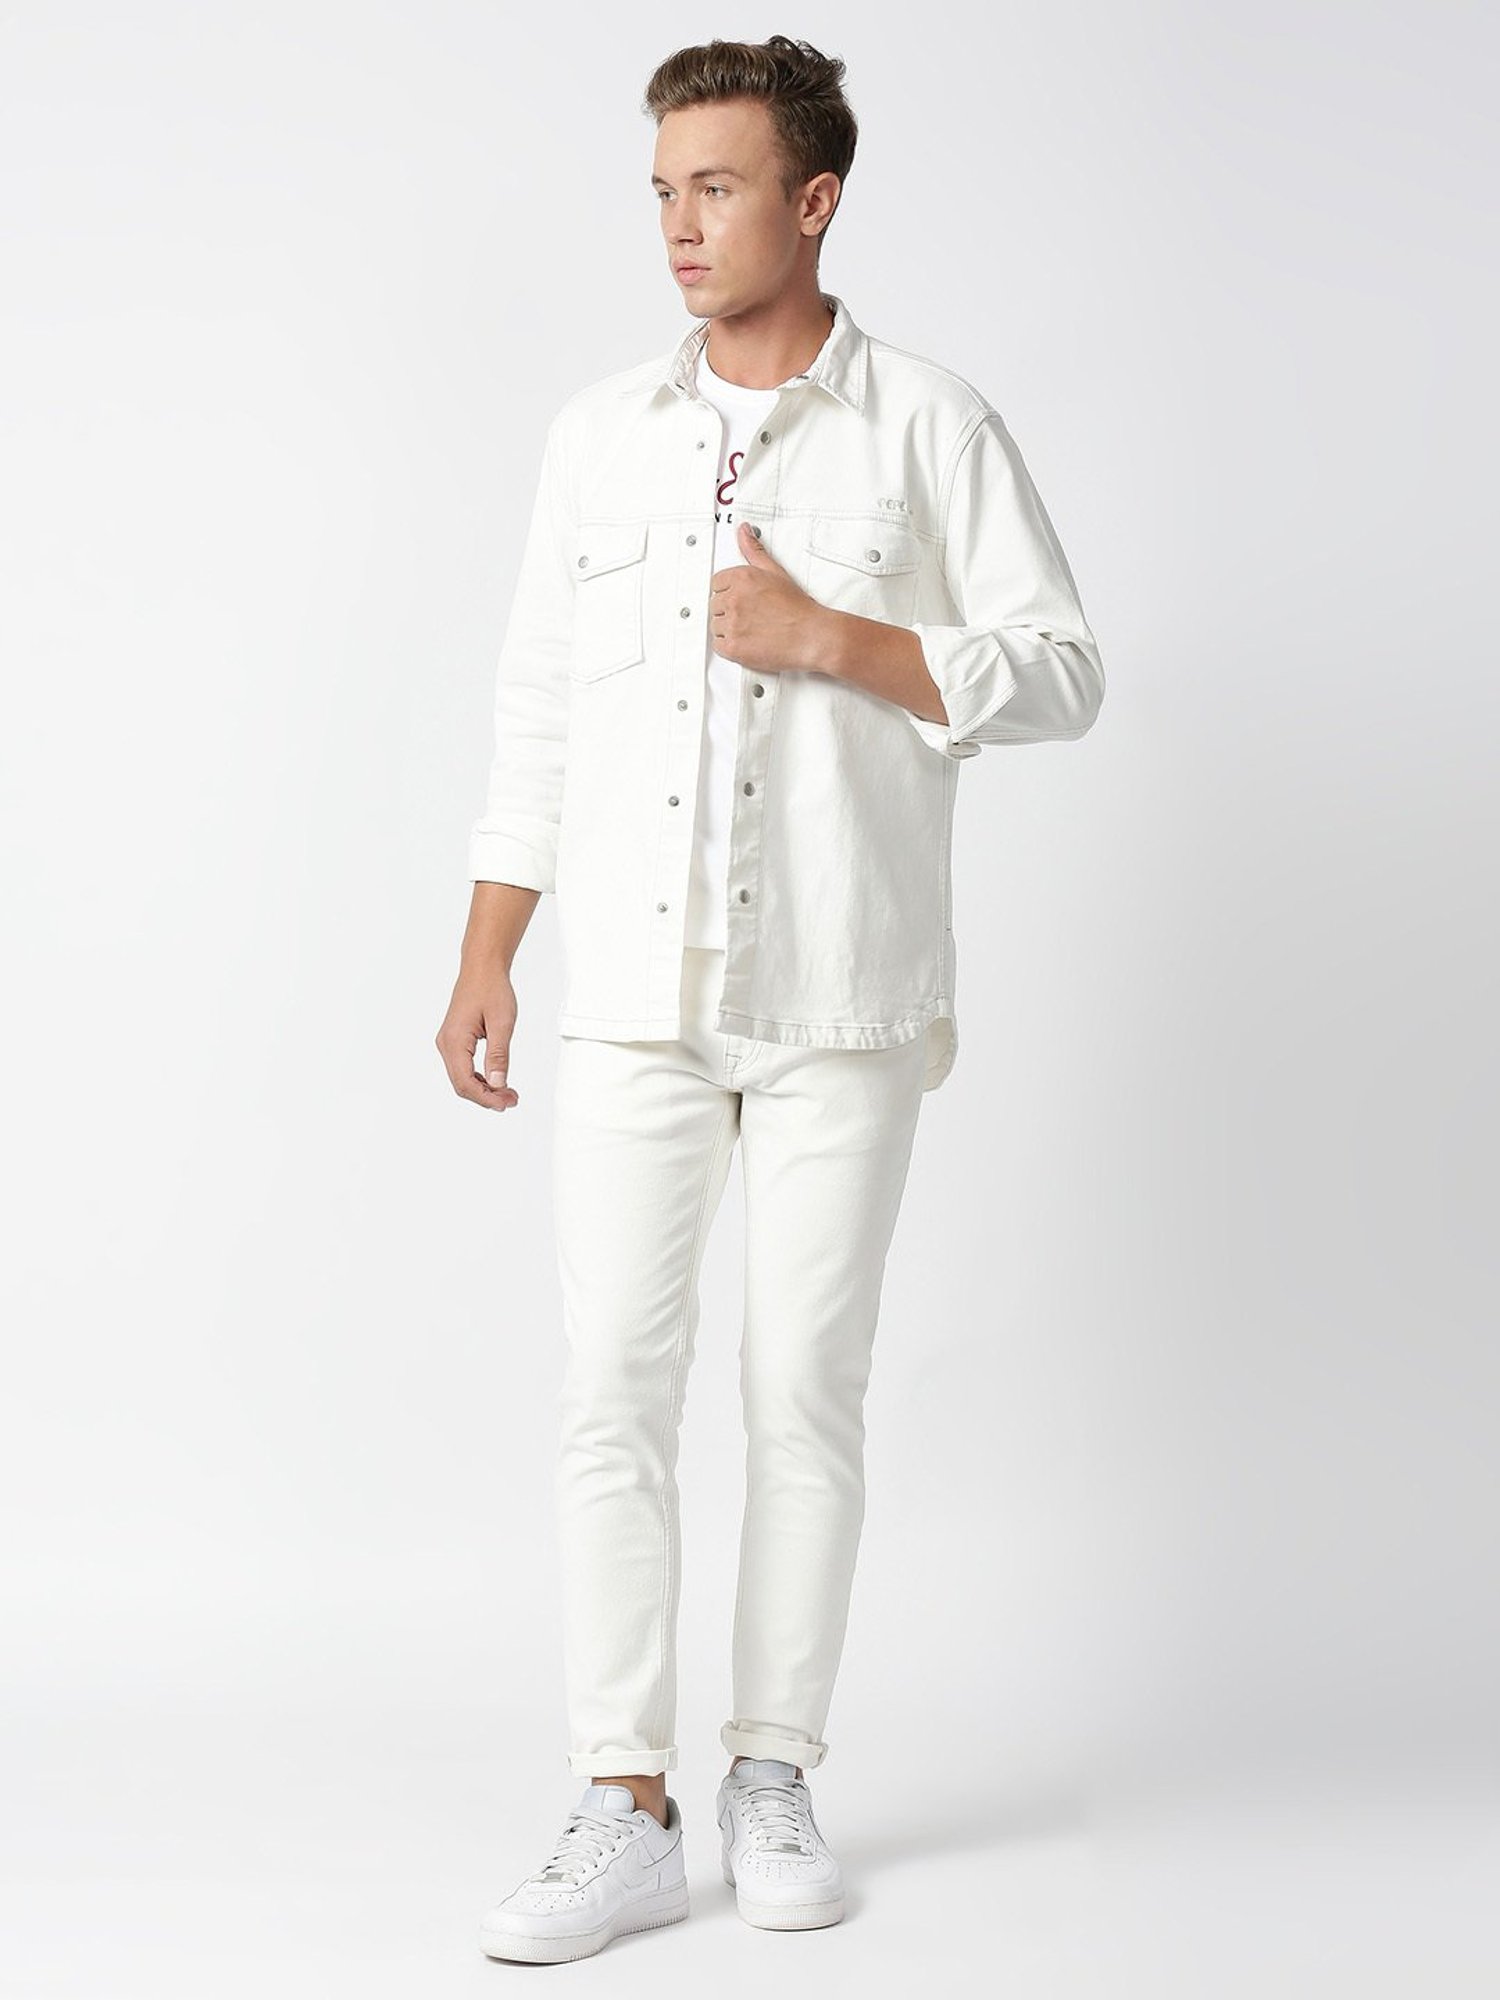 Pepe Jeans Jacket in Rohtas at best price by Style Man - Justdial